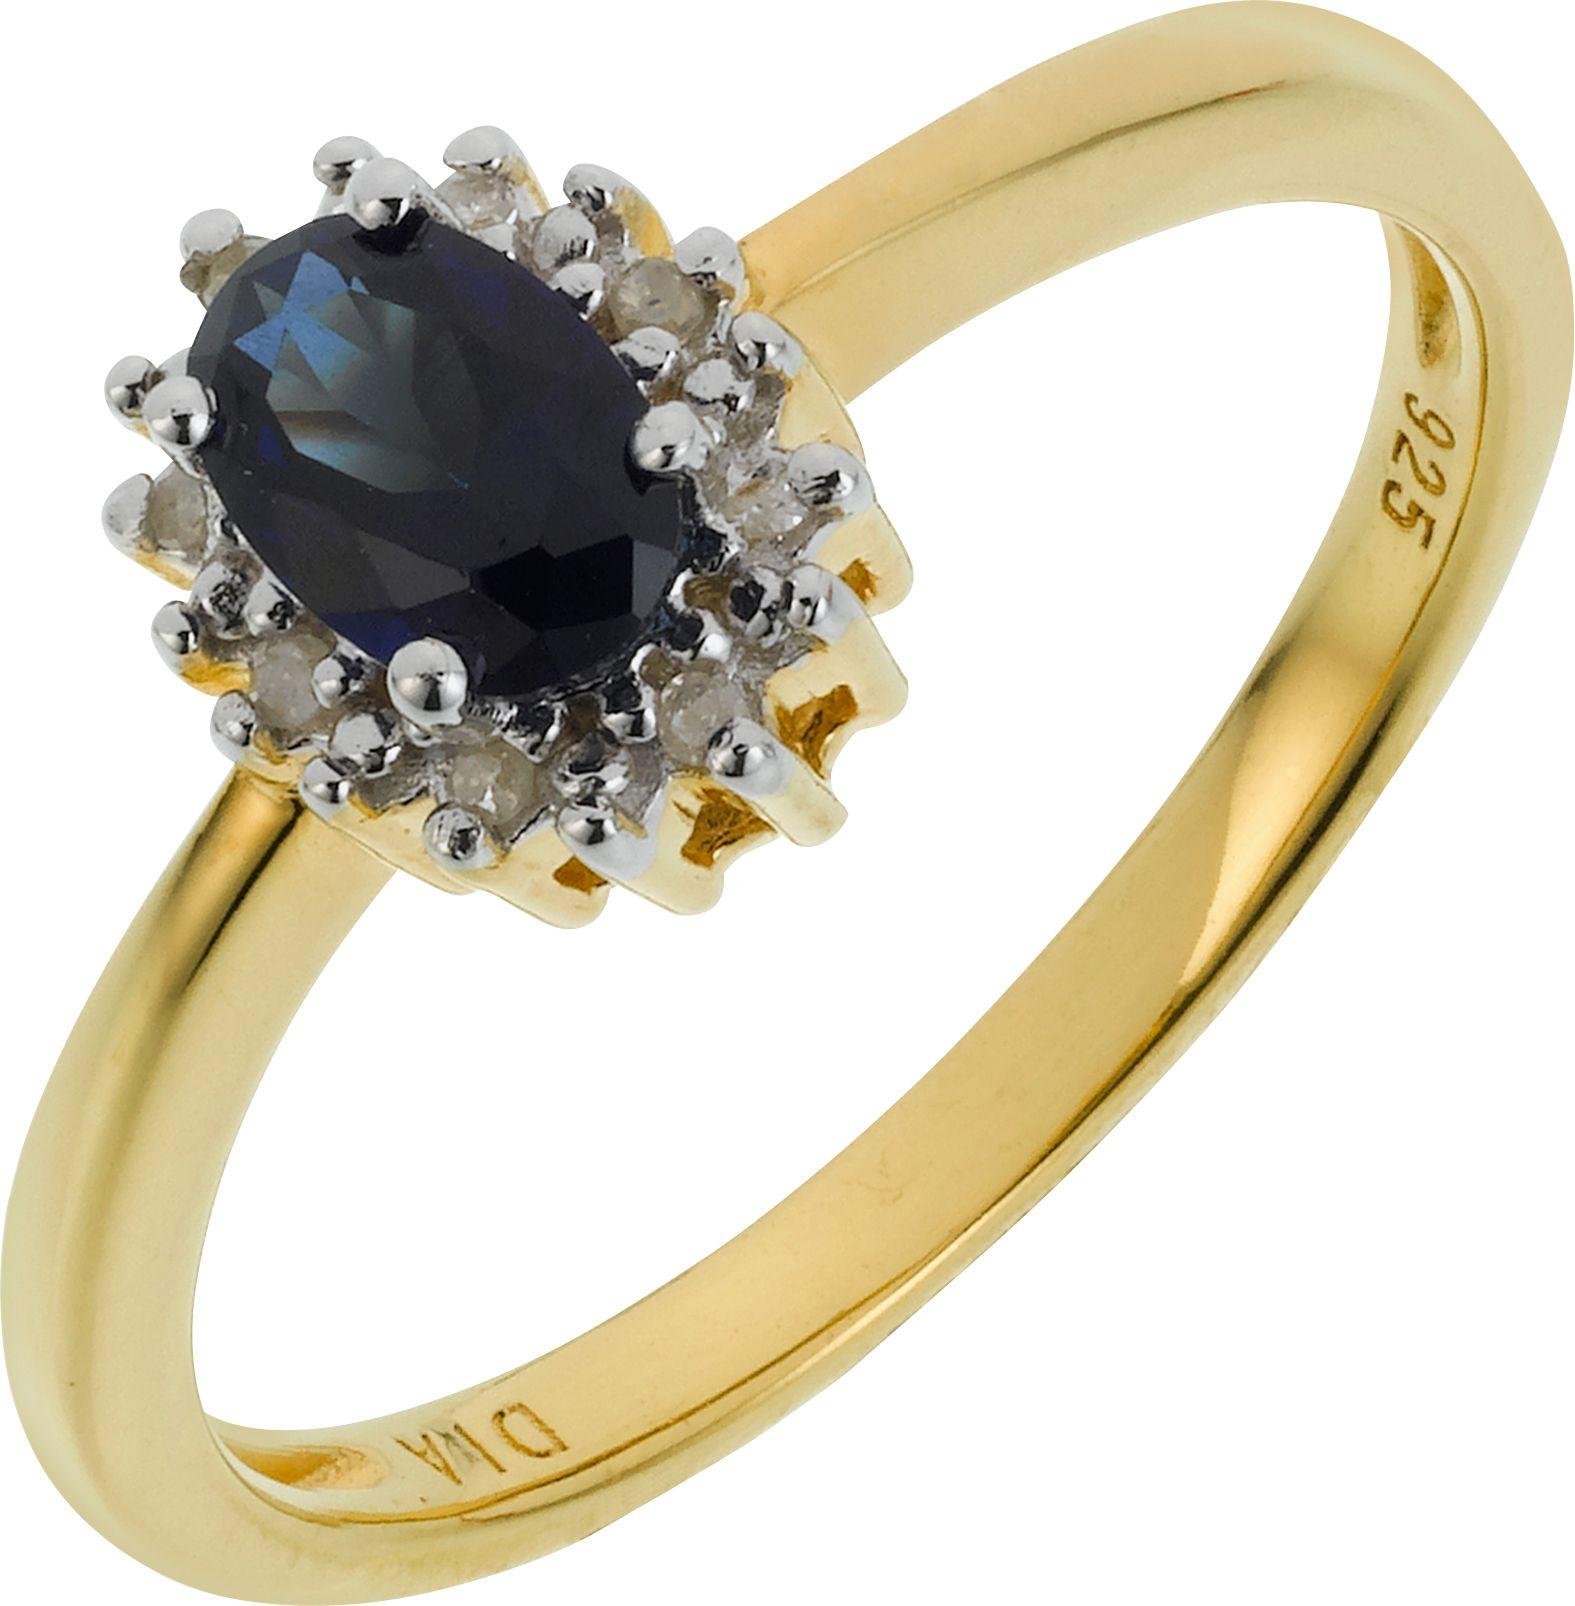 Buy 18ct Gold Plated Silver 1.50ct Look 3 Stone Ring at Argos.co.uk ...